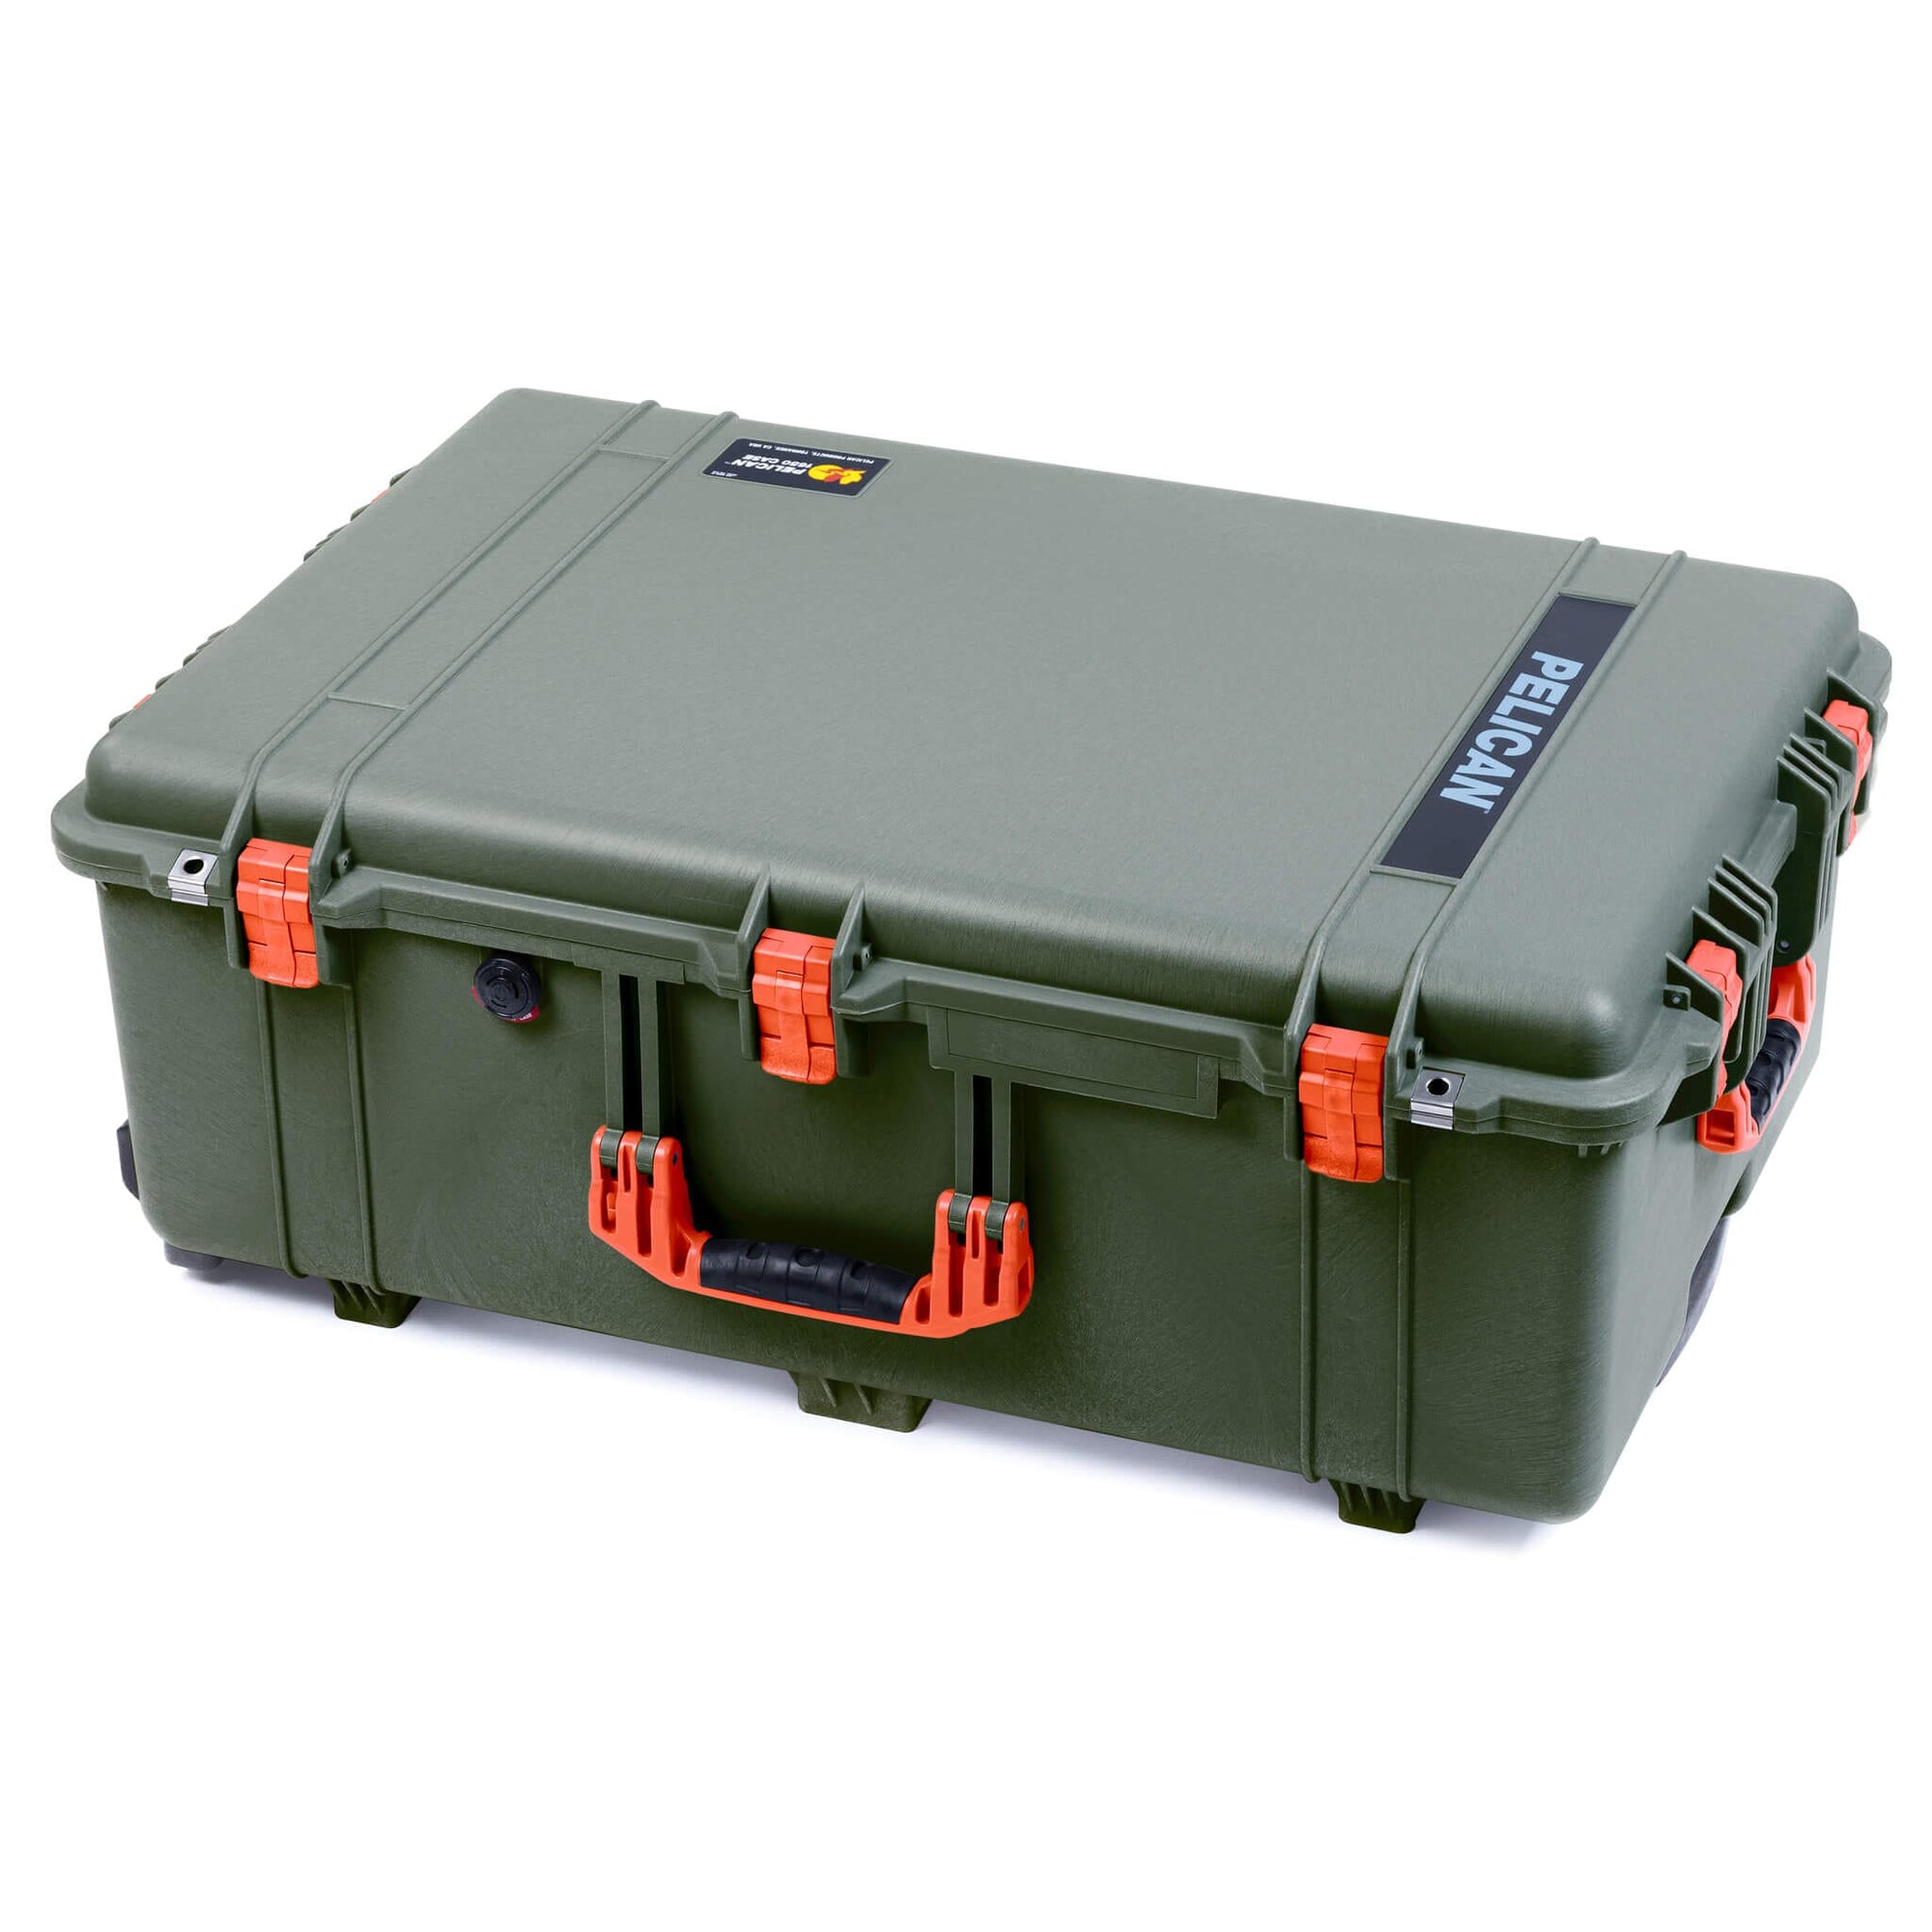 Pelican 1650 Case, OD Green with Orange Handles & Latches ColorCase 